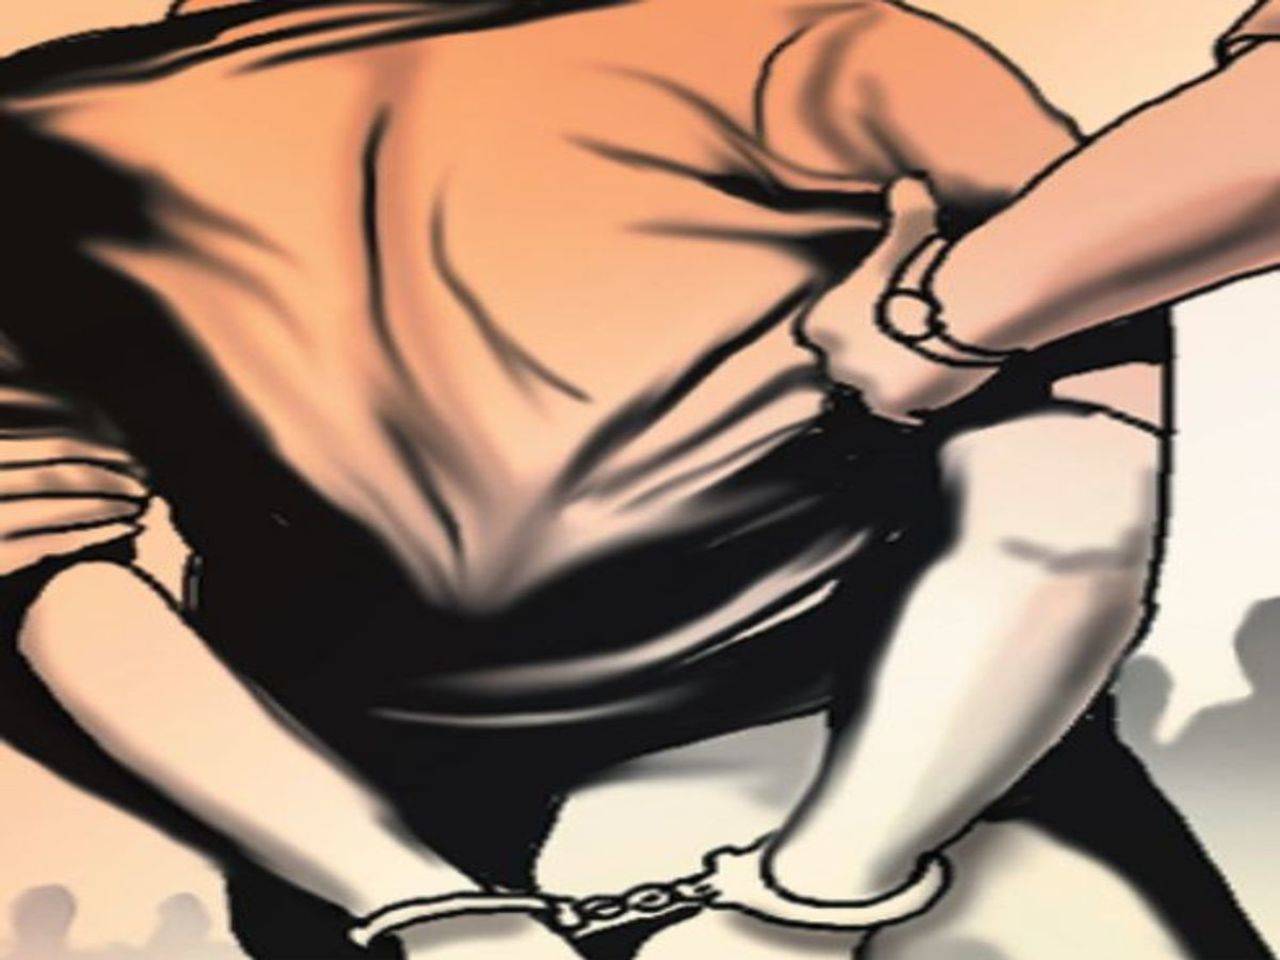 Tamil Nadu Boy, 17, held for sexually harassing 10-year-old girl Coimbatore News